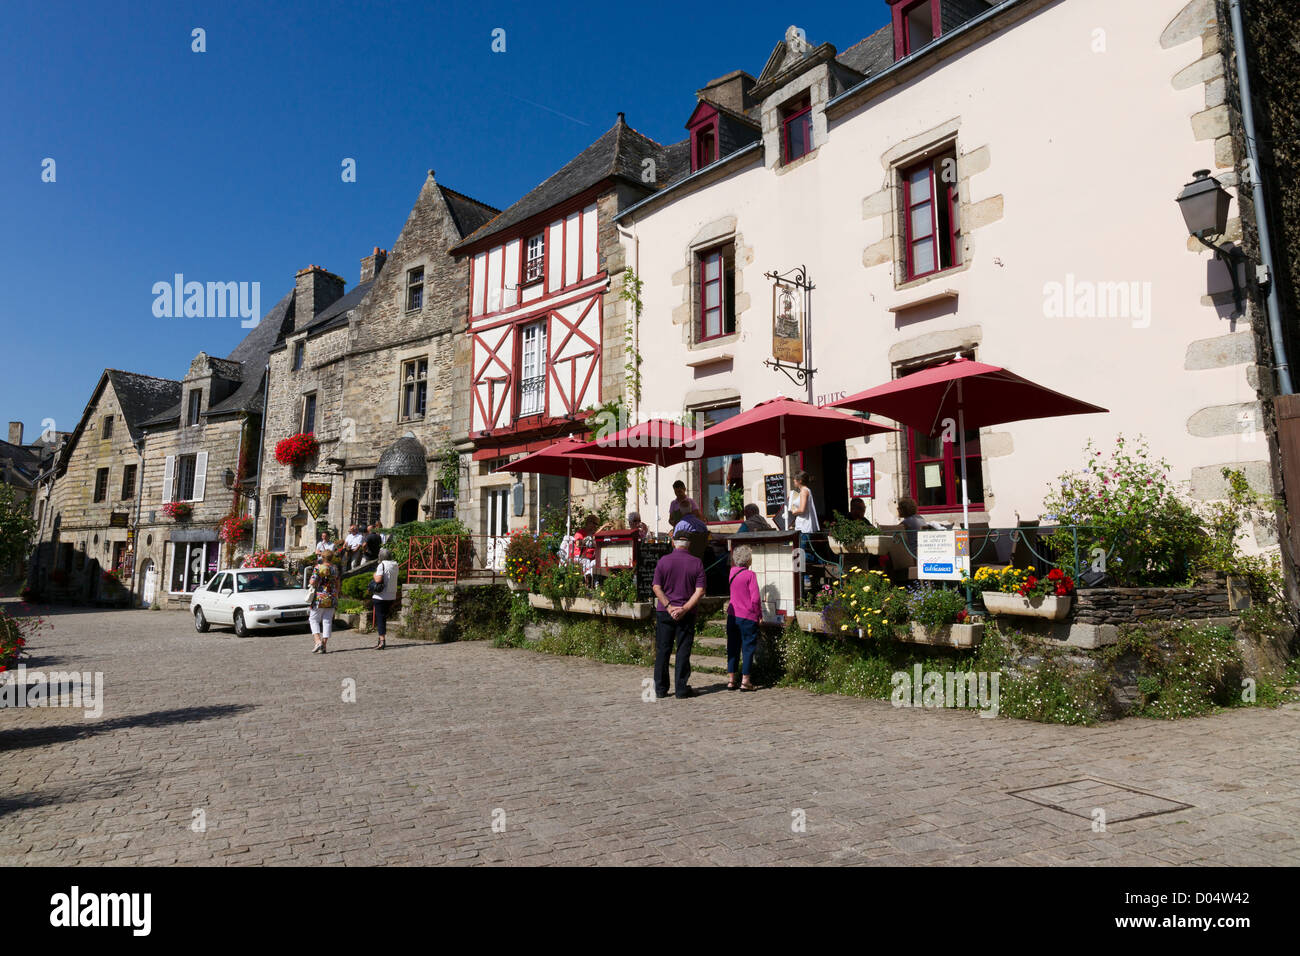 High above the River Arz, Rochefort-en-Terre has been voted one of France’s most beautiful village. Stock Photo